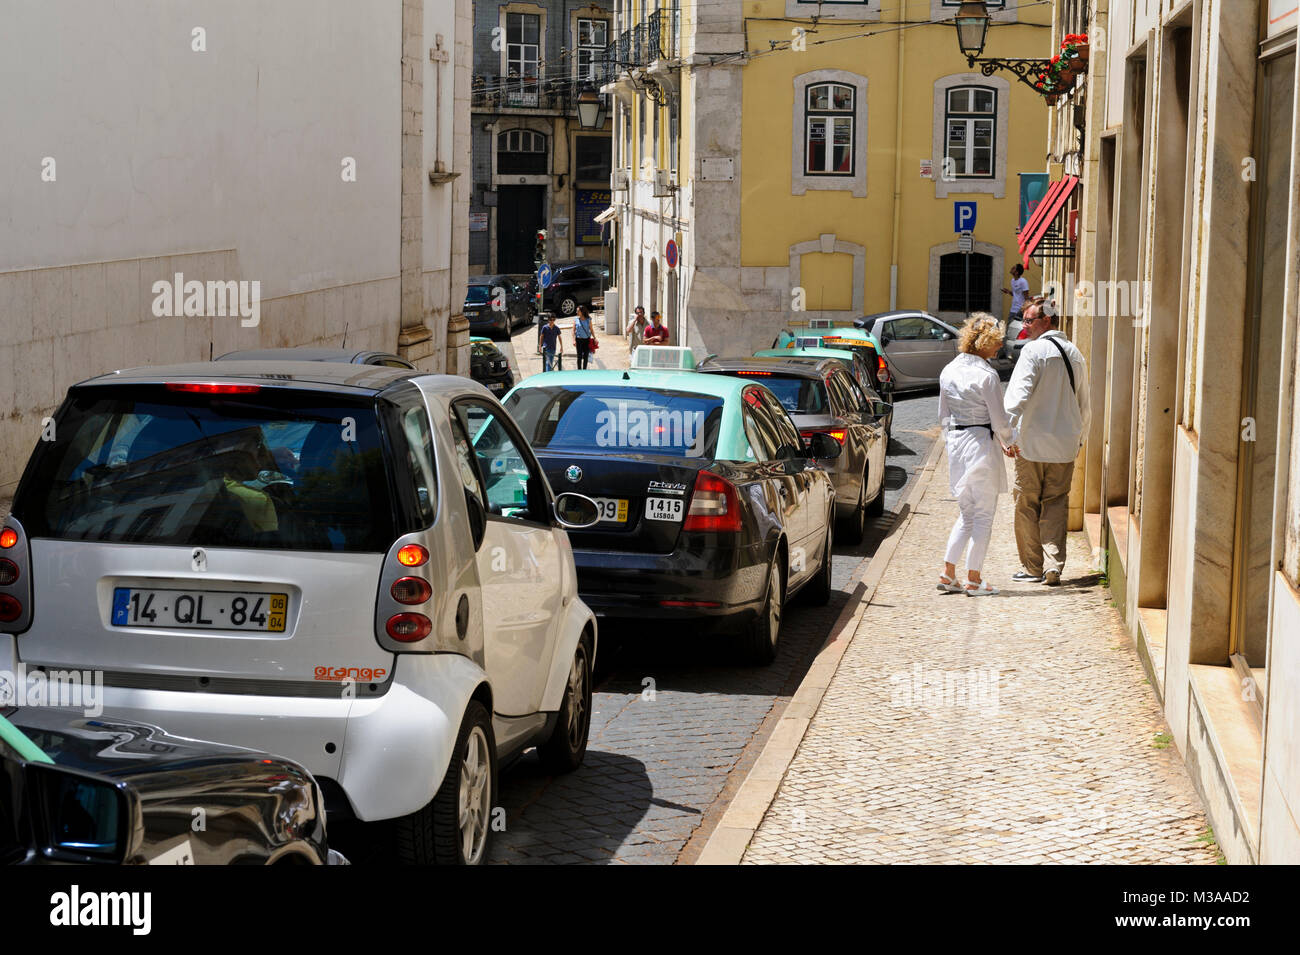 A couple walking on the pavement on the street while several cars passing by, Lisbon, Portugal Stock Photo